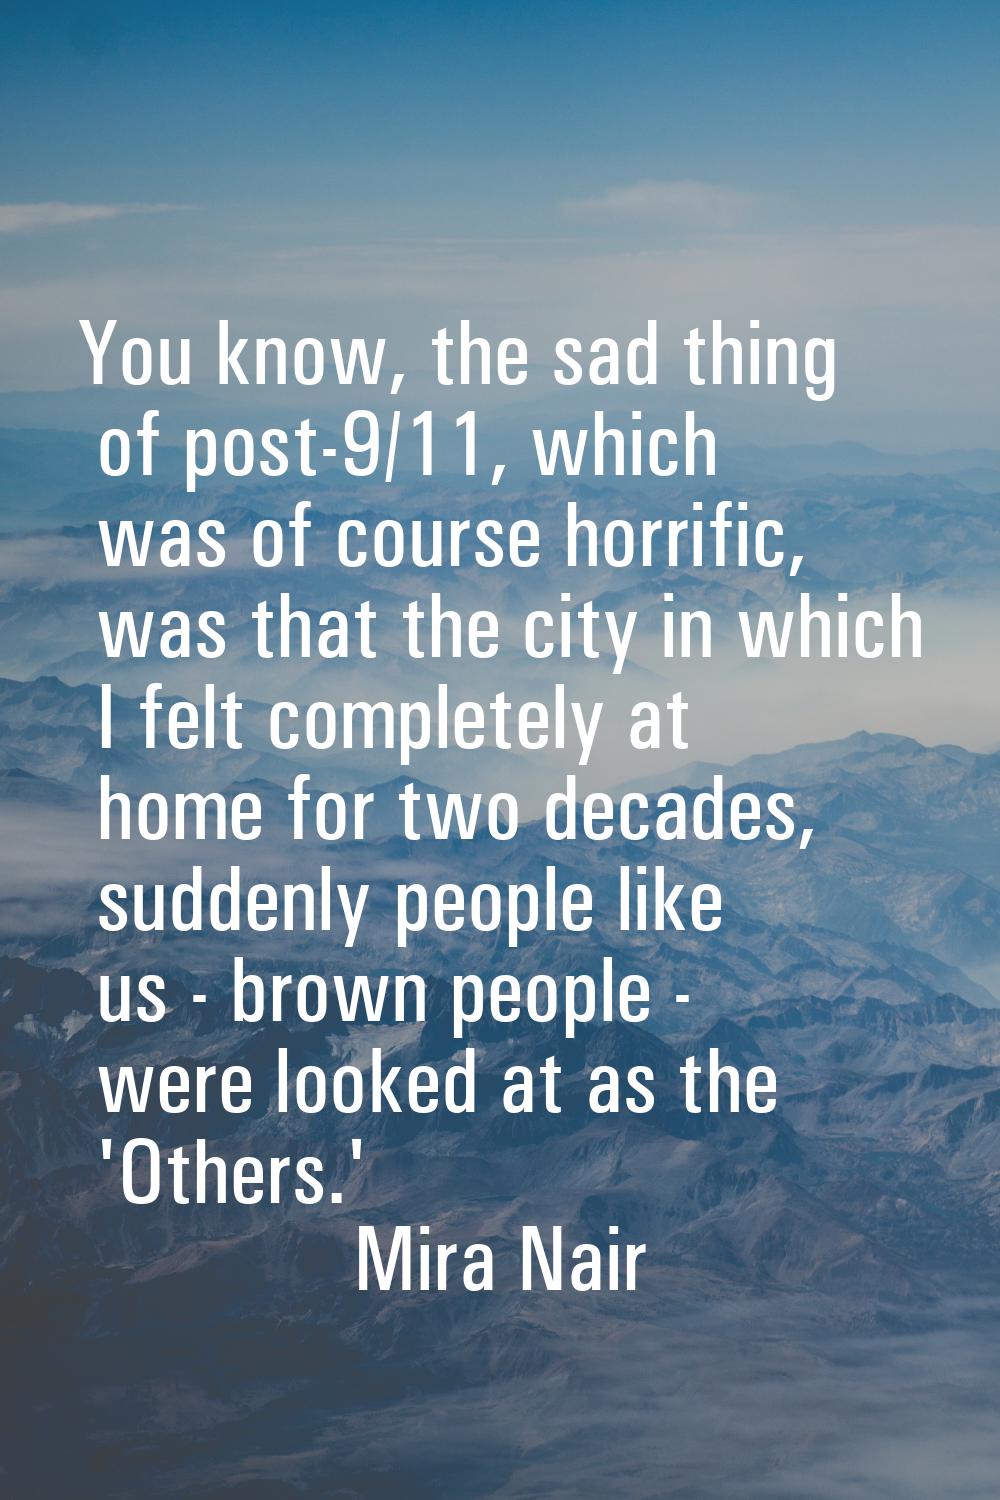 You know, the sad thing of post-9/11, which was of course horrific, was that the city in which I fe